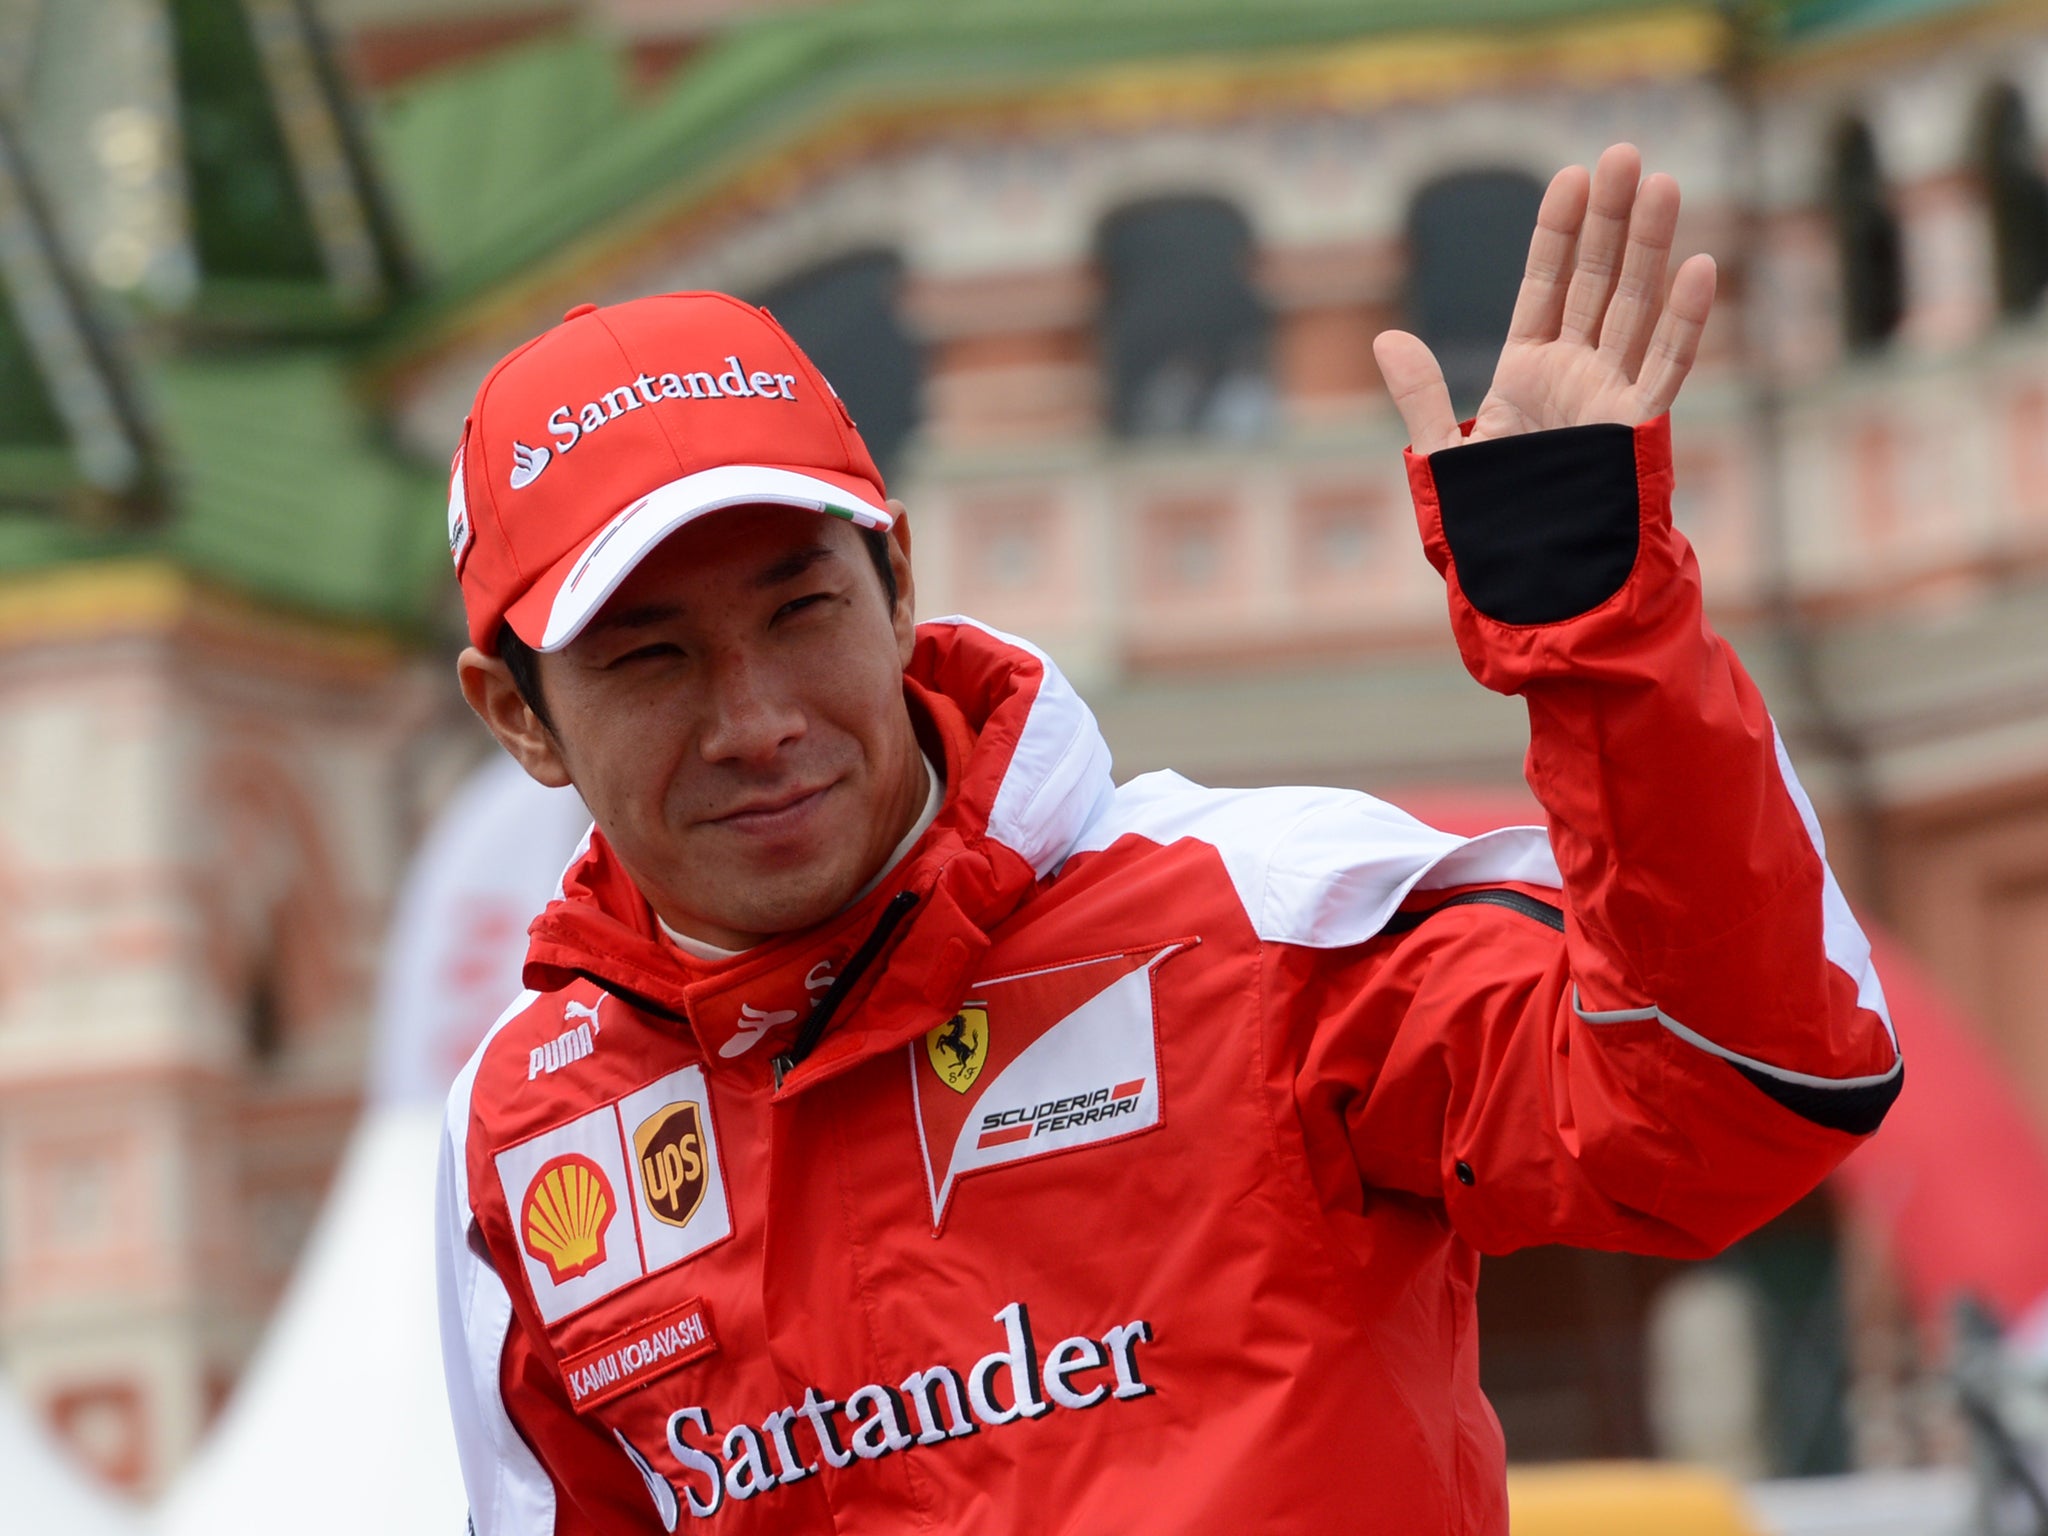 Kamui Kobayashi waves to the Russian crowd before a demo run on the streets of Moscow